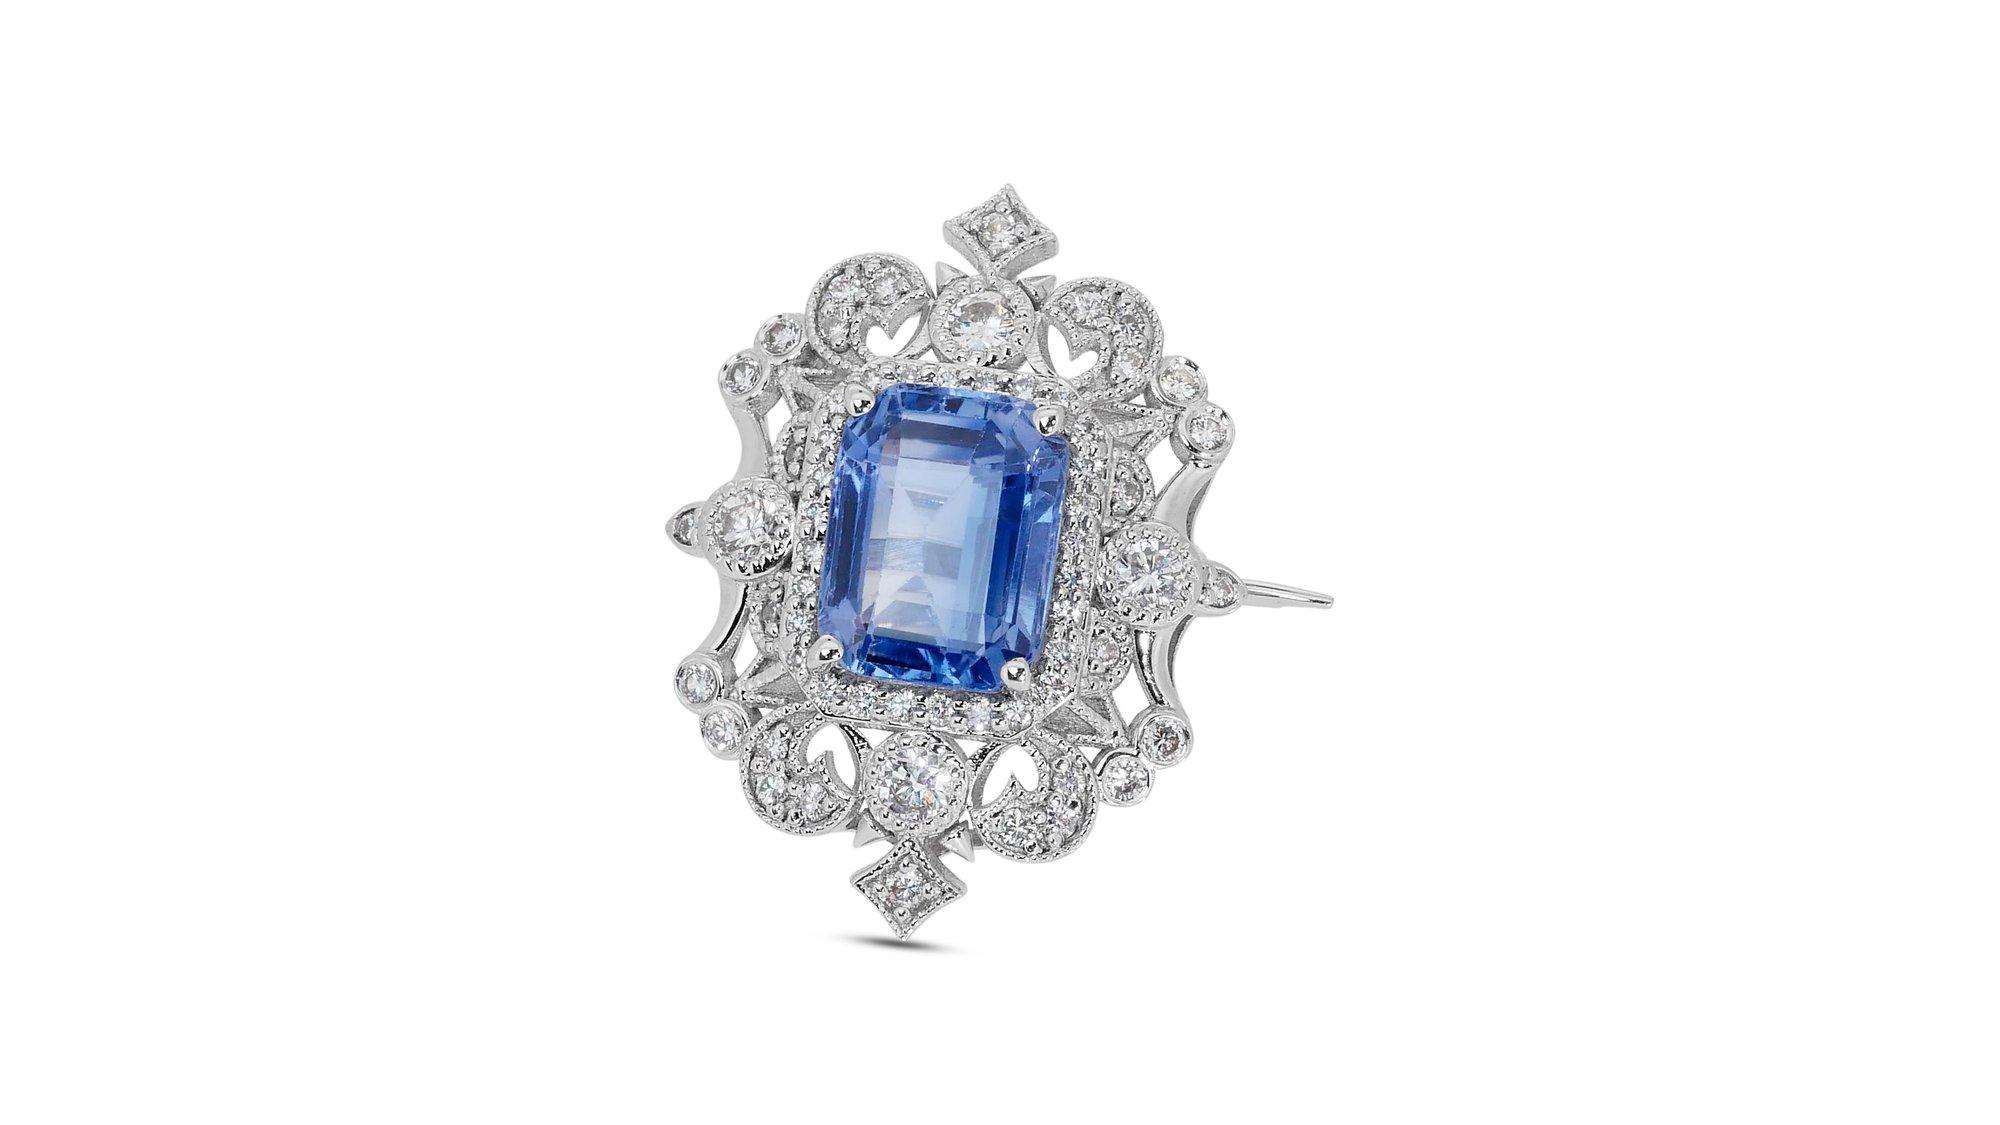 Octagon Cut 18k White Gold Brooch w/ 5.65 ct Sapphire and Natural Diamonds GIA Certificate For Sale